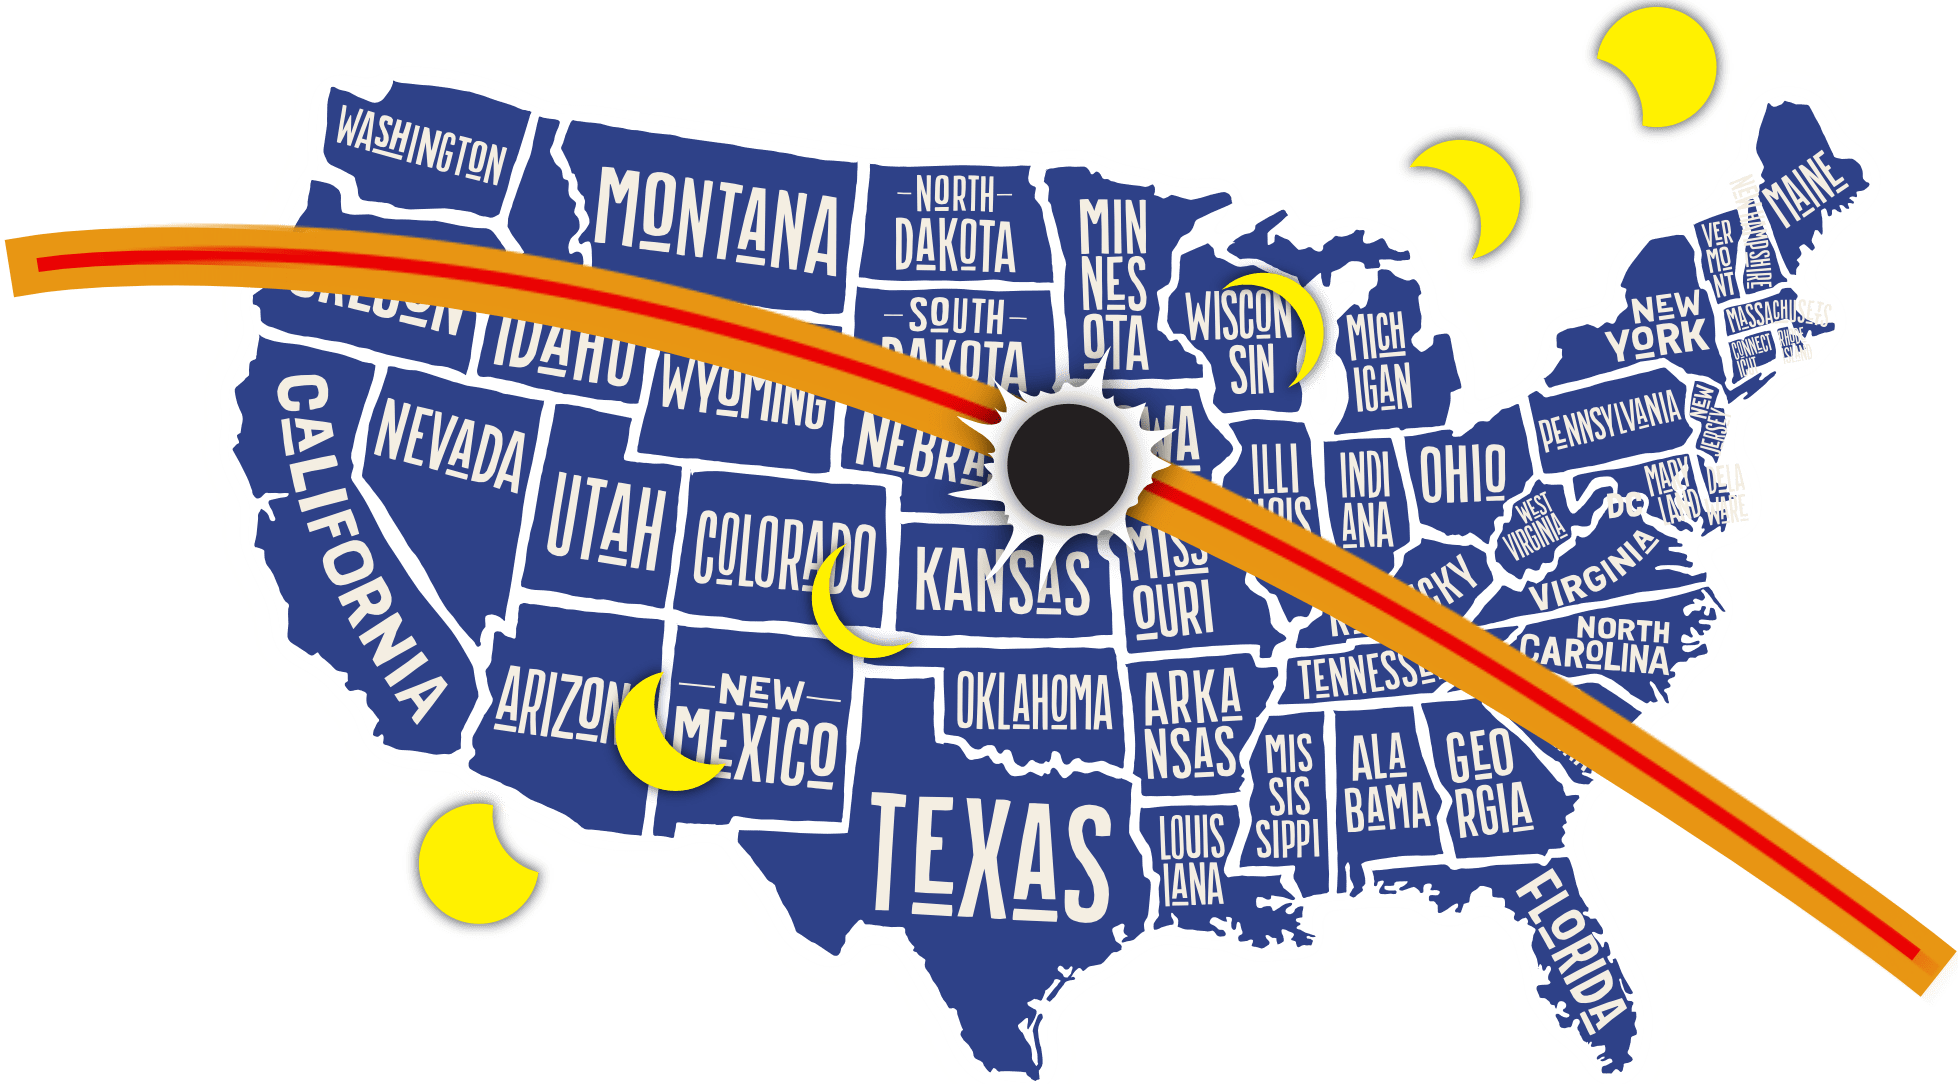 Solar Eclipse Maps Plus Eclipse Times for Your Area and Eclipse